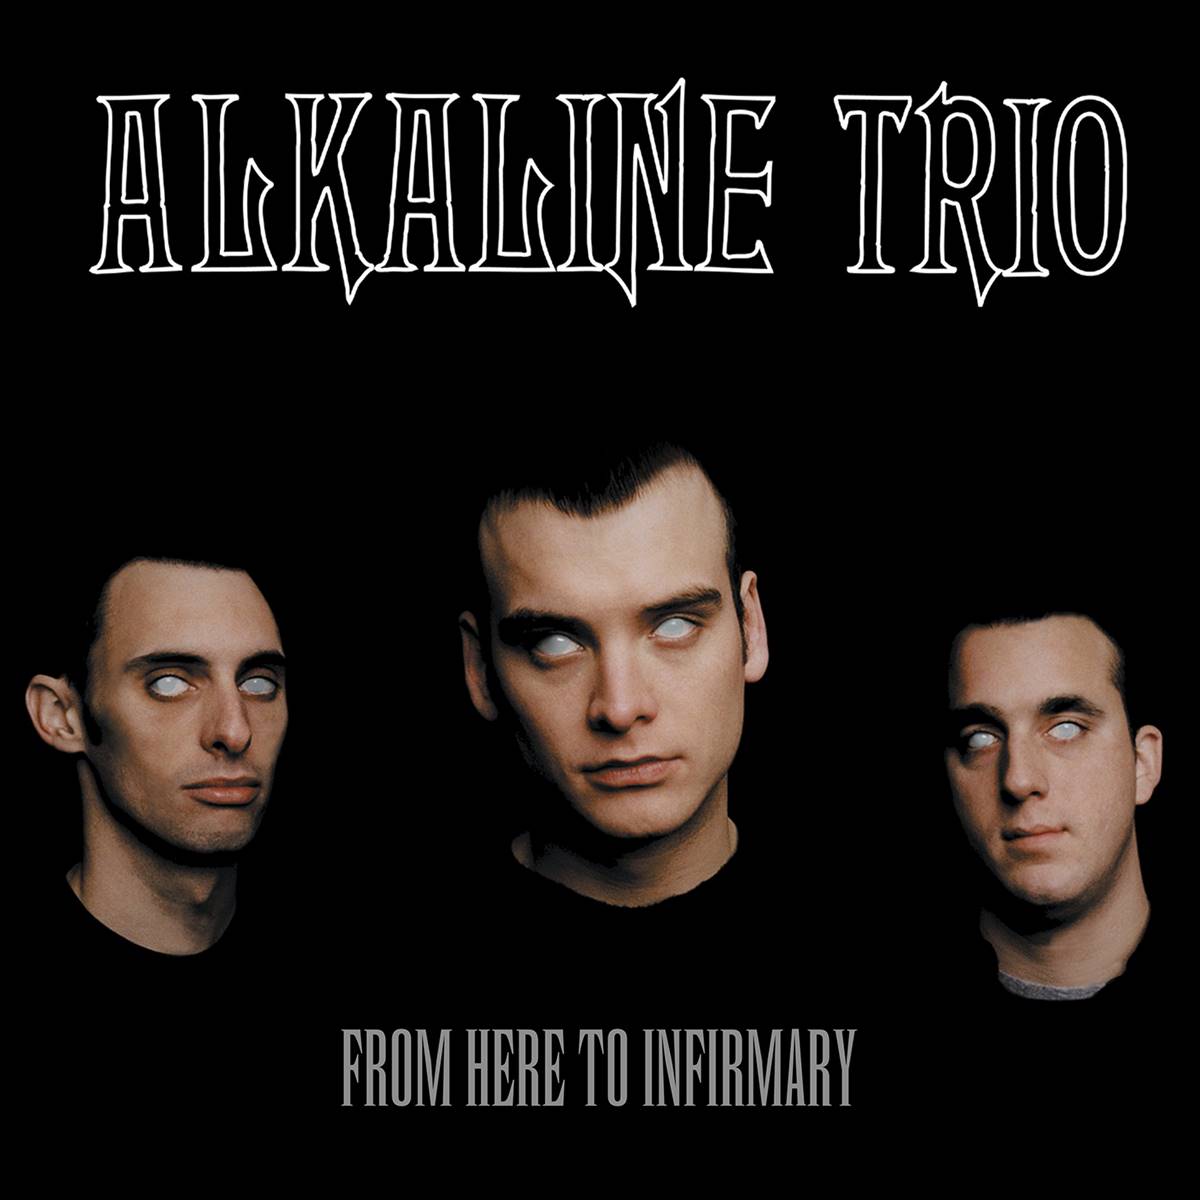 Alkaline Trio - From Here To Infirmary Vinyl